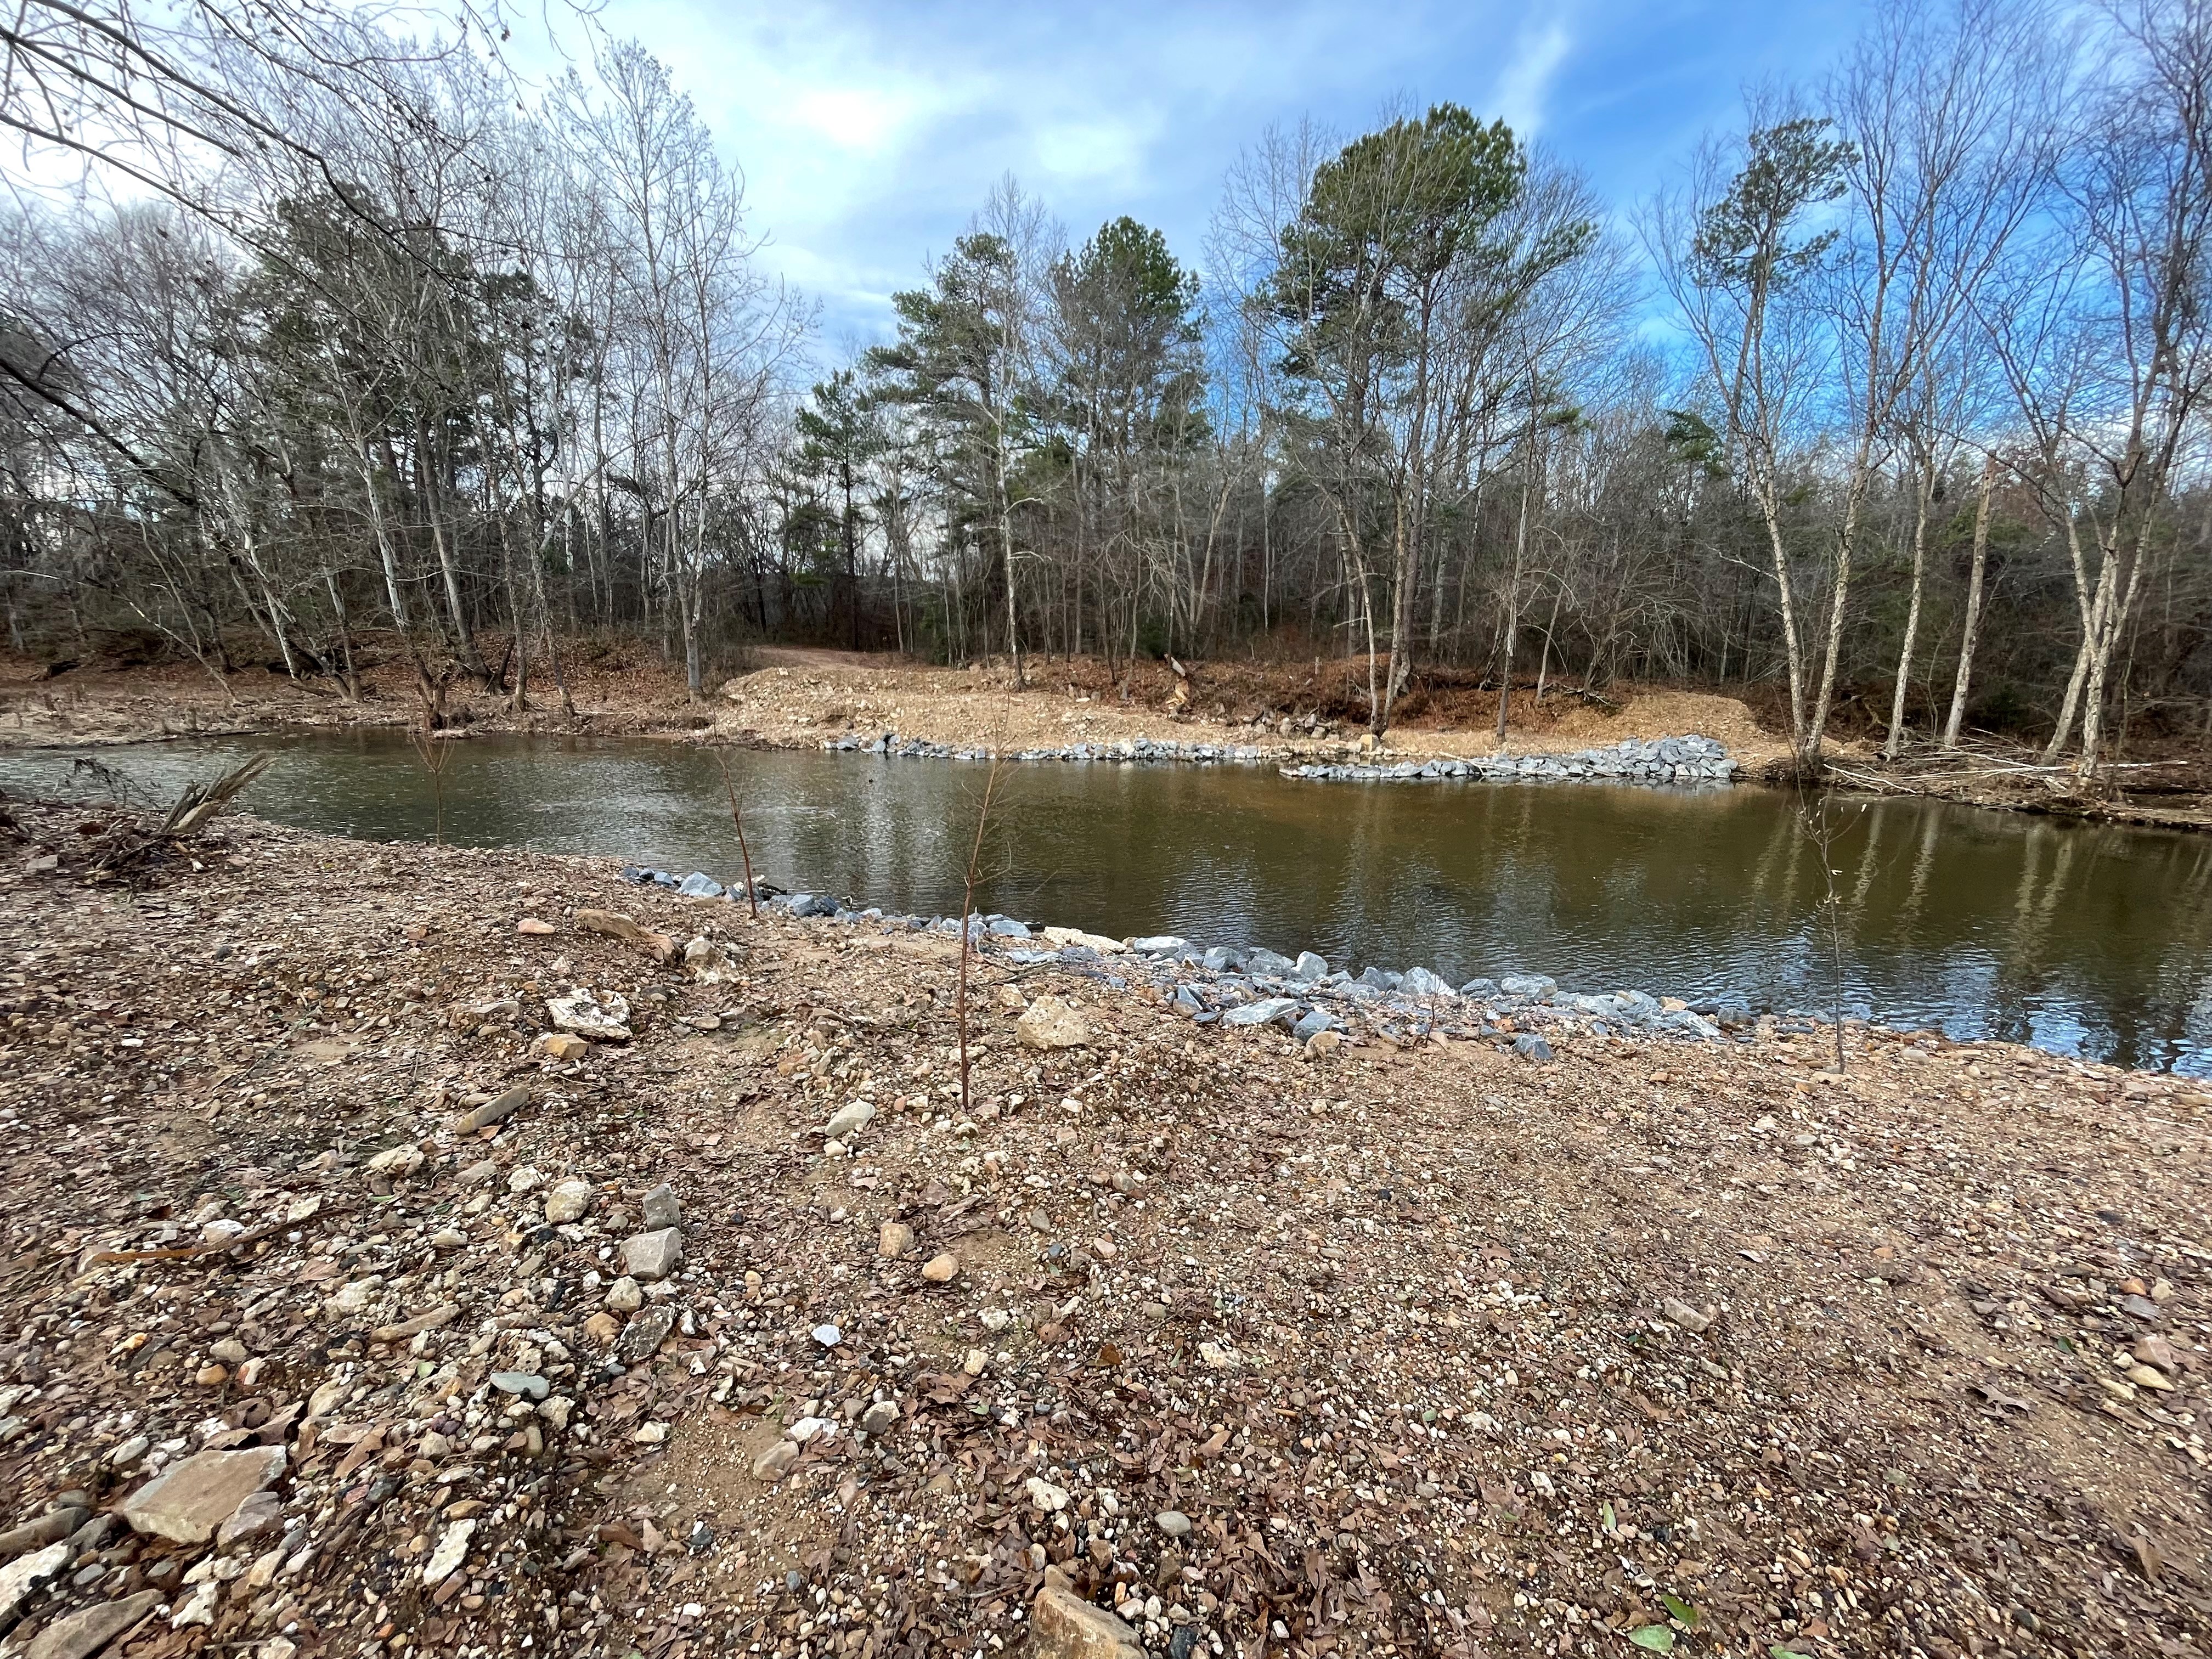 Image of the Saline River with the legacy crossing removed.